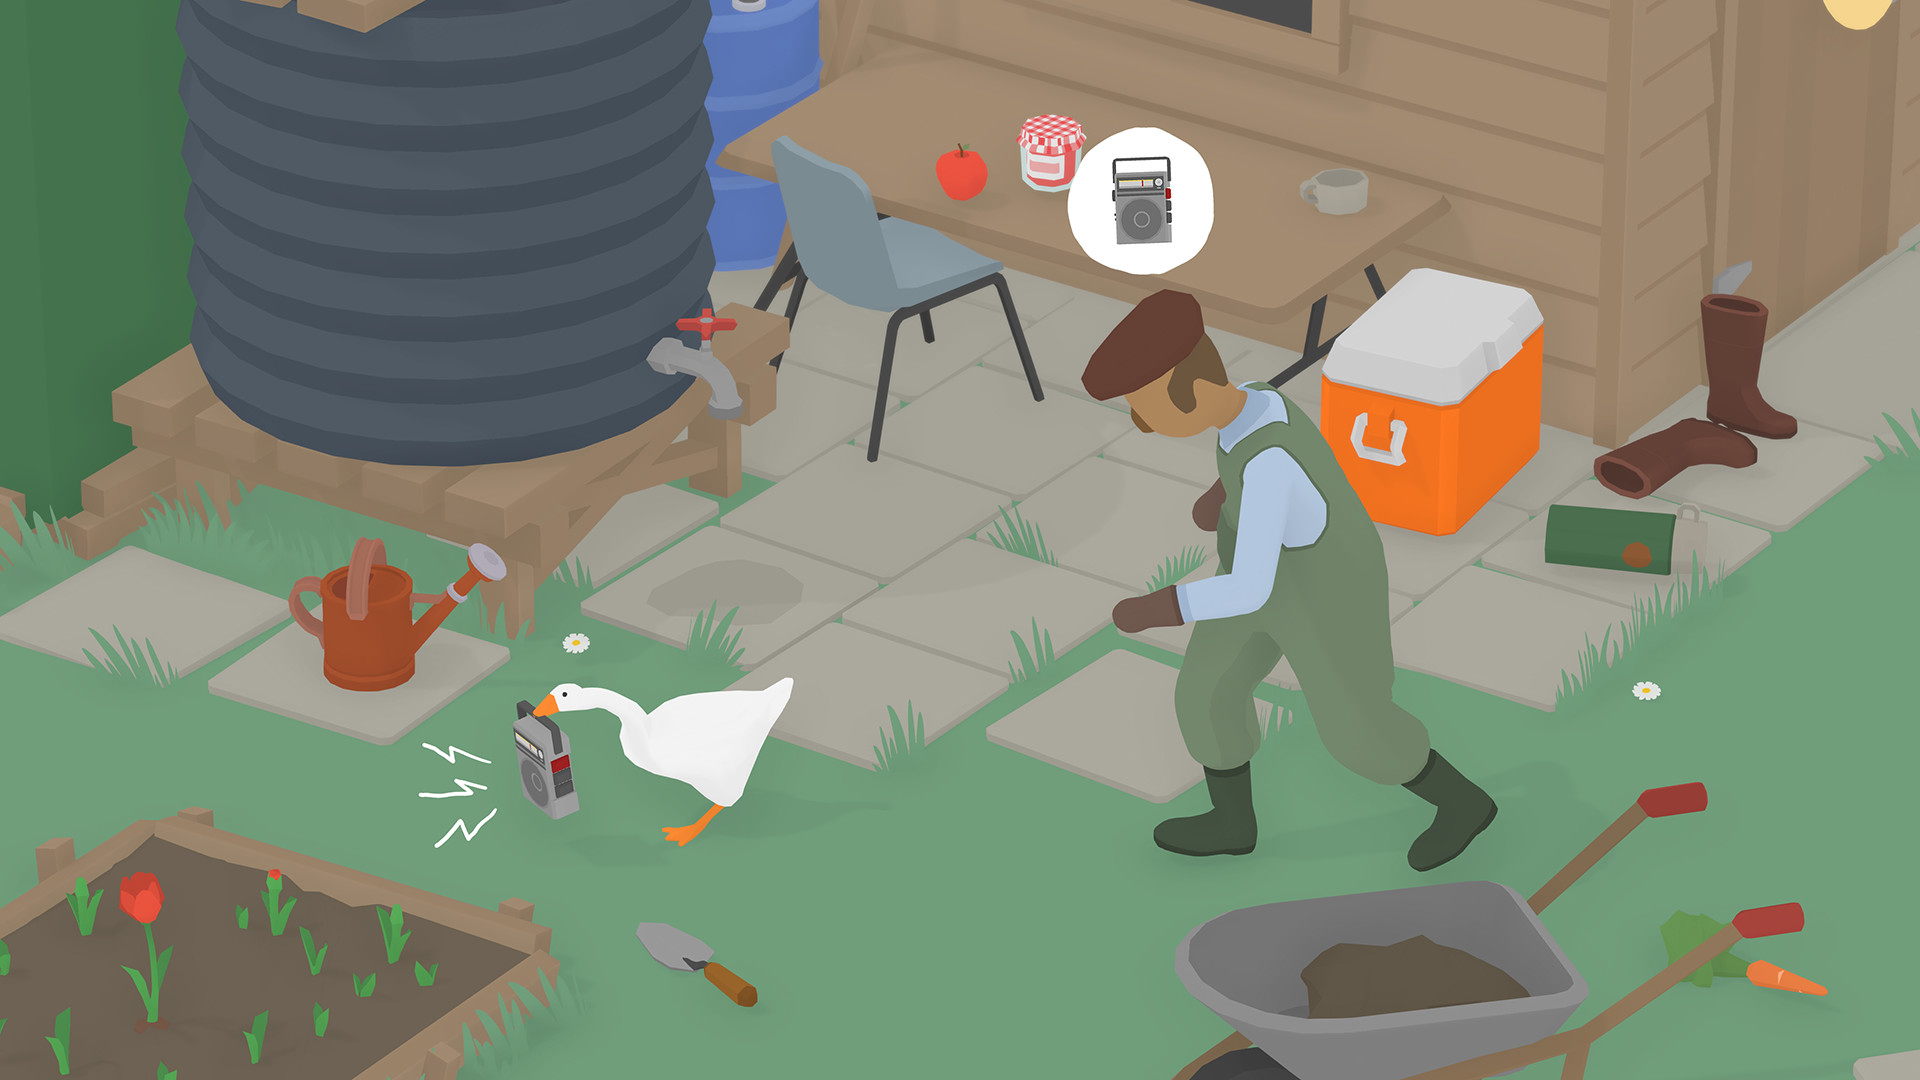 untitled goose game update